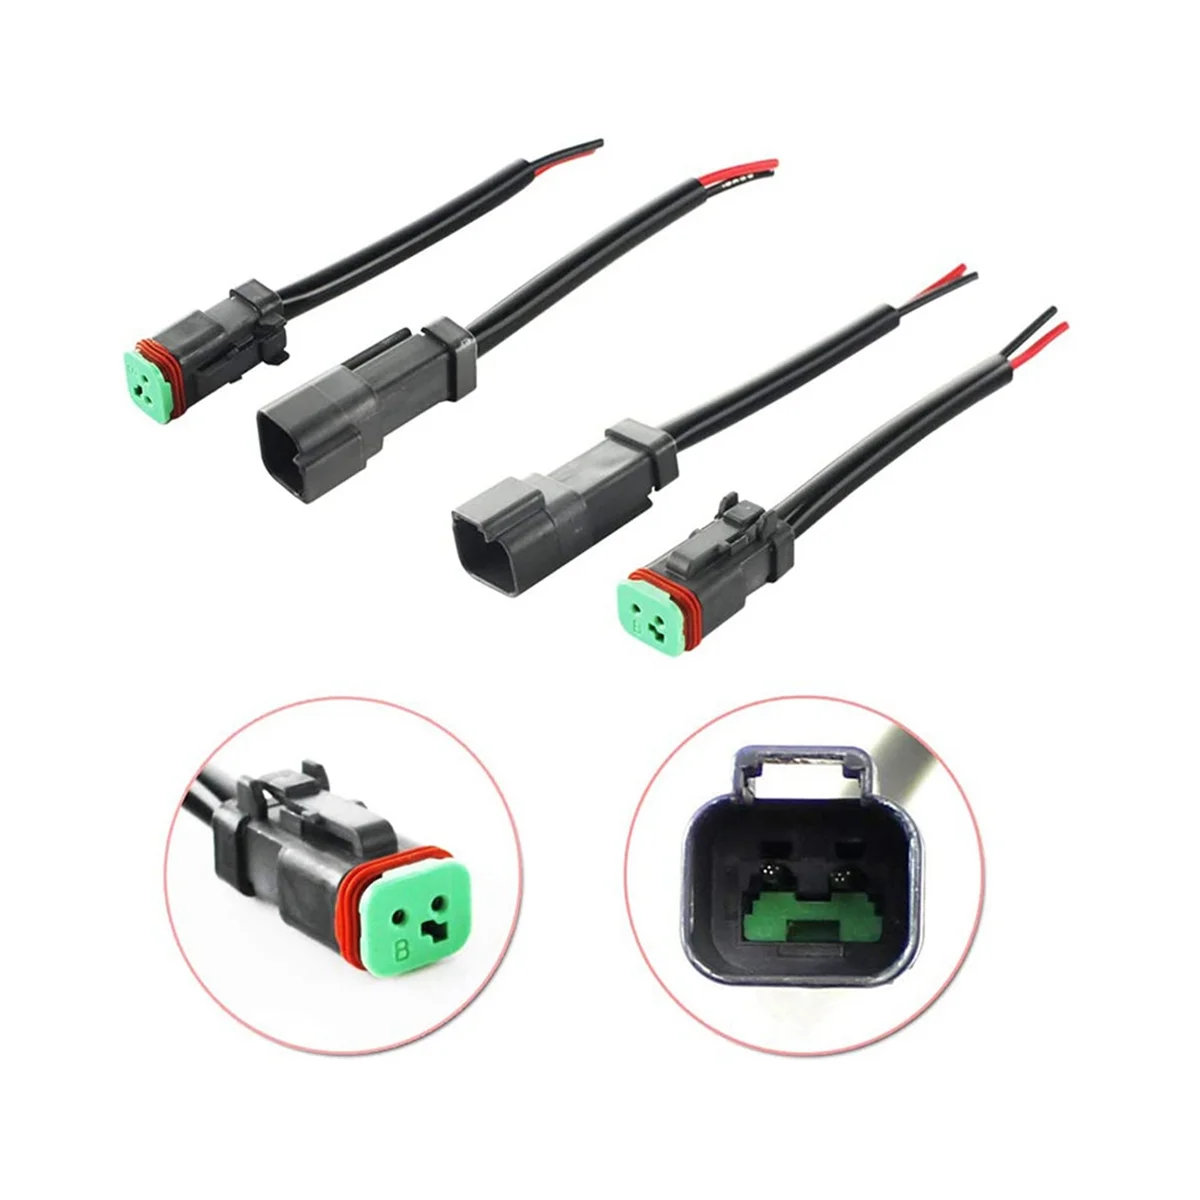 

2 Pin DT Connector Waterproof Automotive Electrical Connector 16 AWG Male and Female Wire Connectors for Car Truck Boat